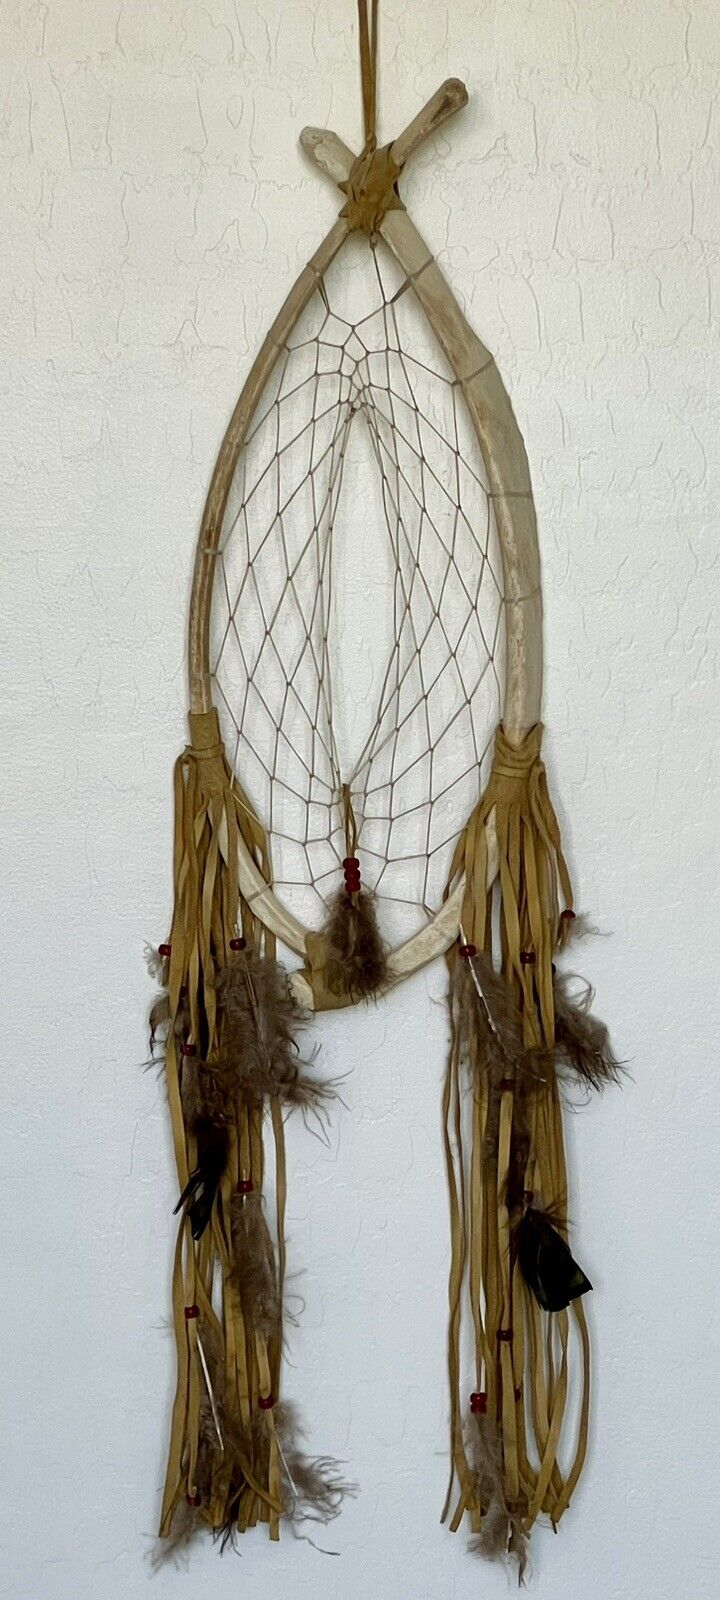 Native American Dream Catcher/Deer Rib Frame/Leather/Feathers/Red Beads/31”t